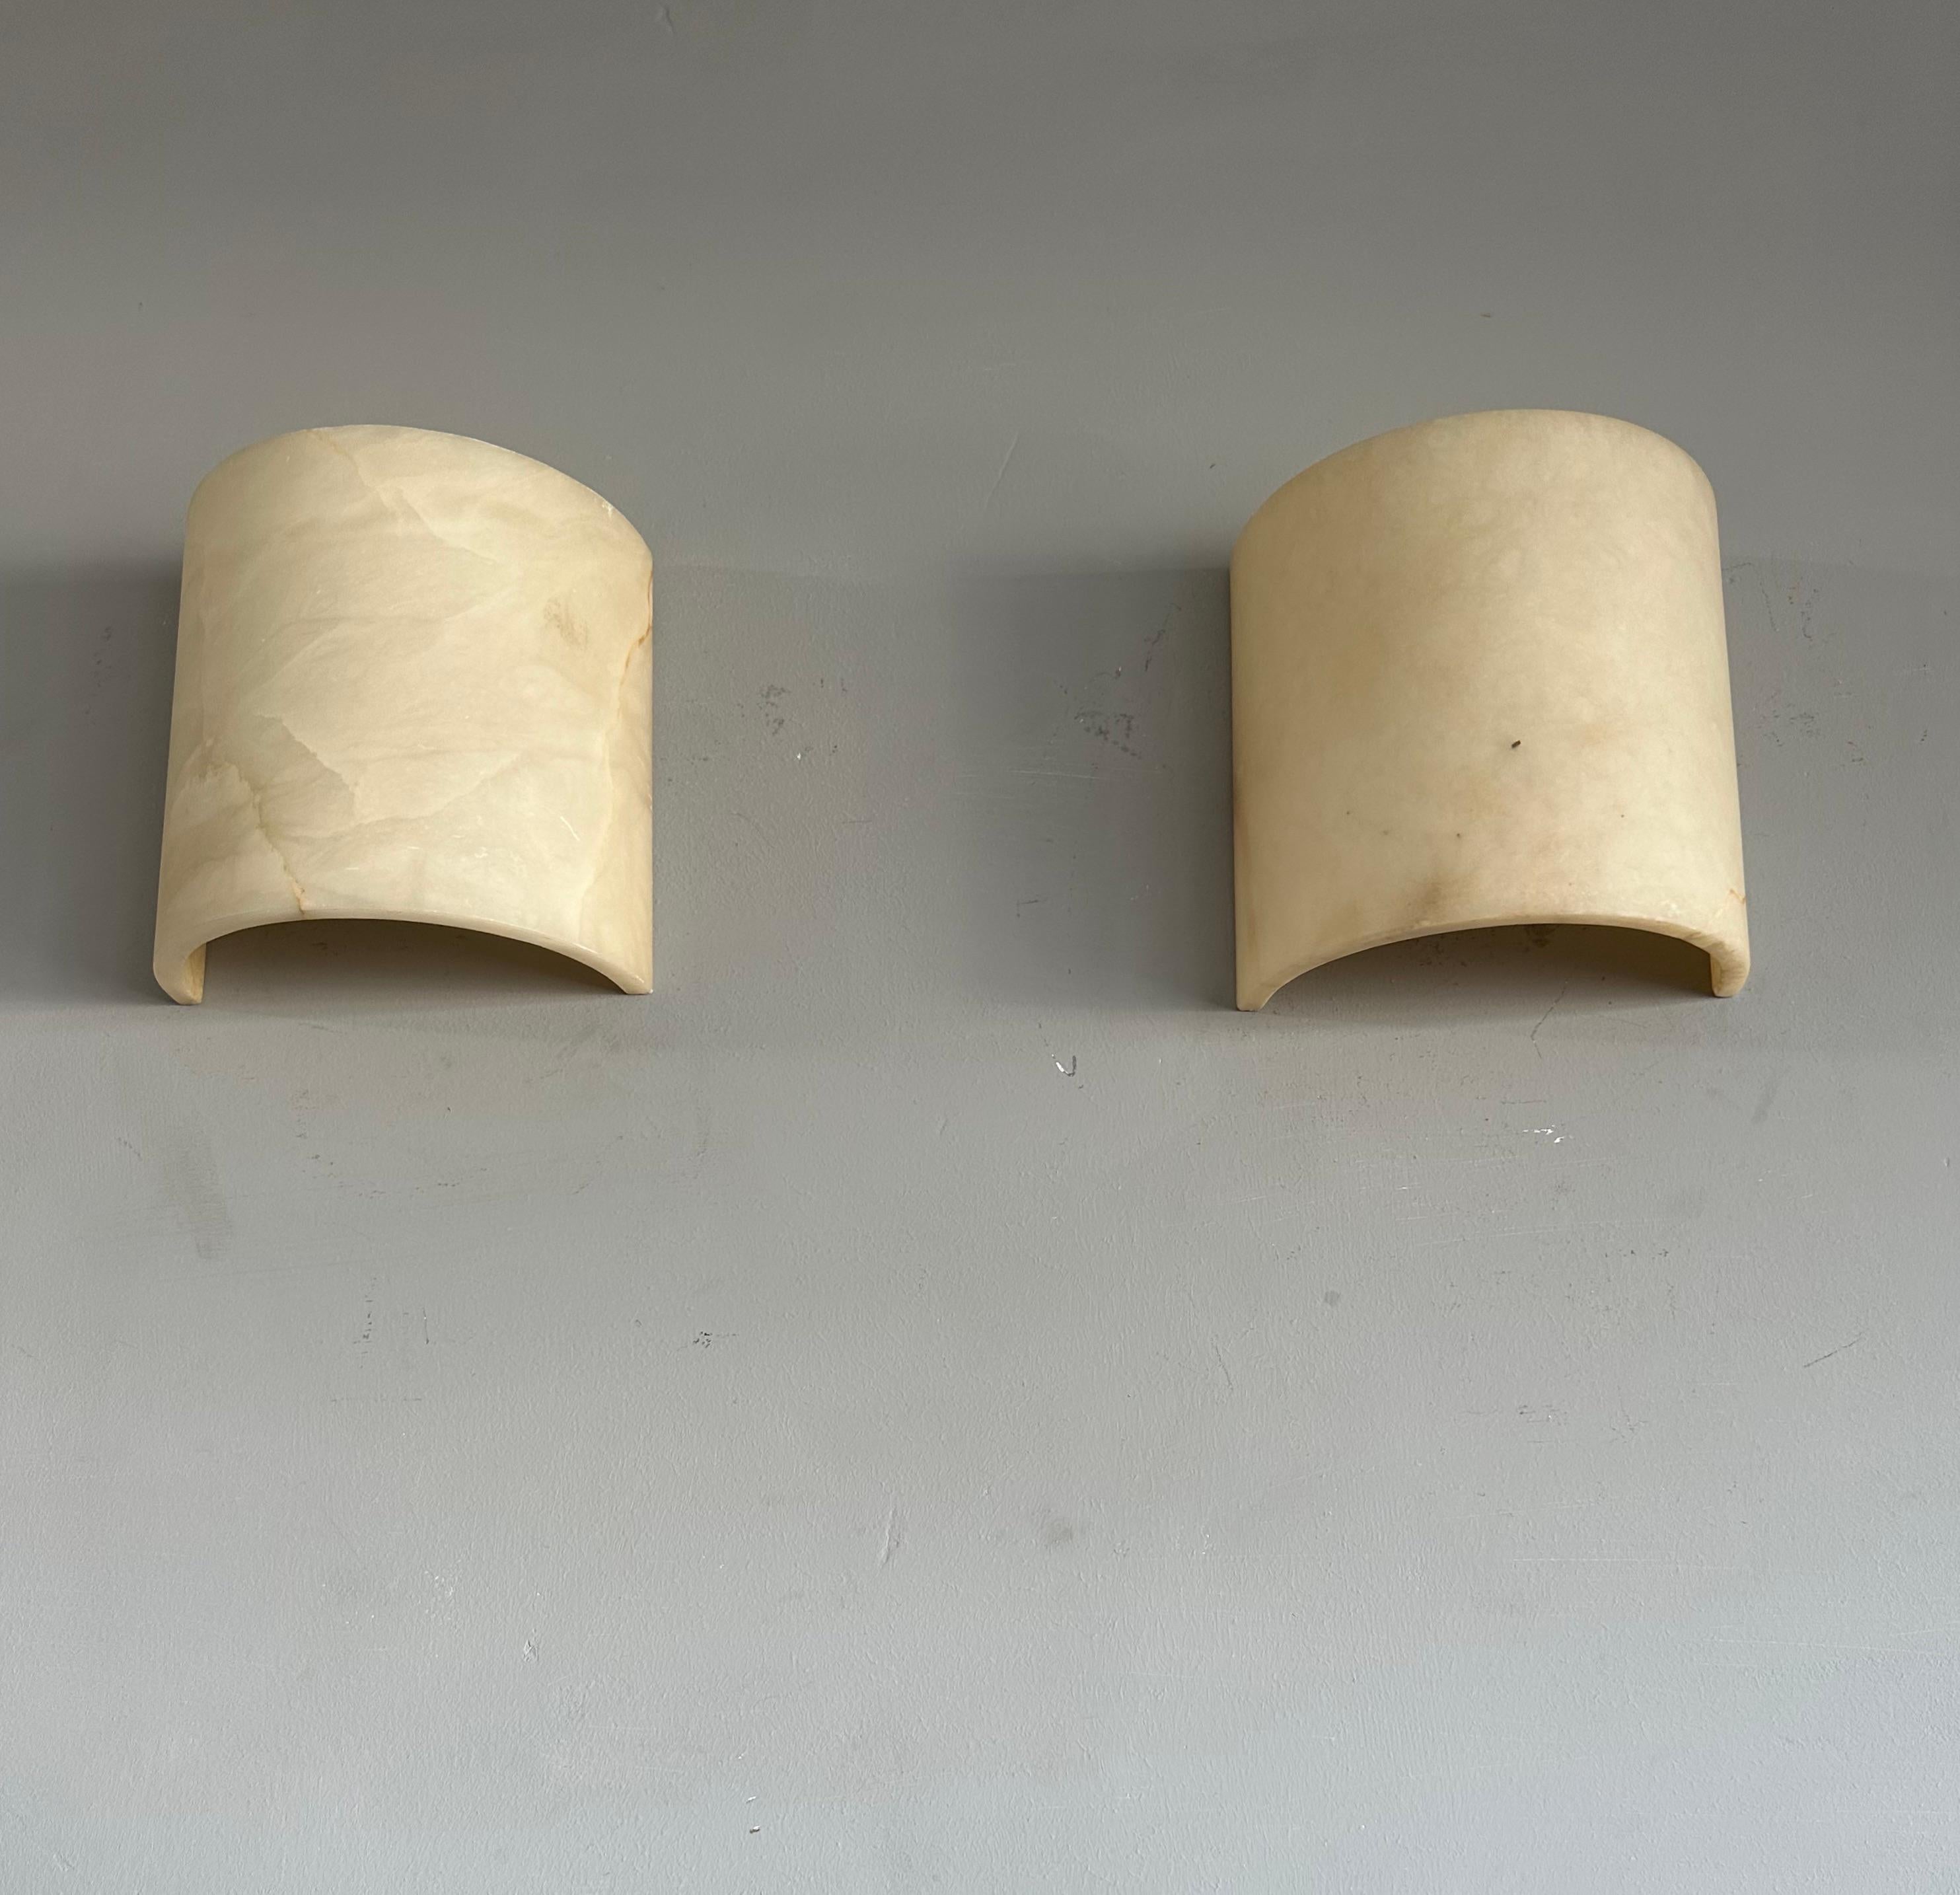 Great Pair of Art Deco Style Alabaster Up & Down Light Wall Sconces / Fixtures (Metall) im Angebot